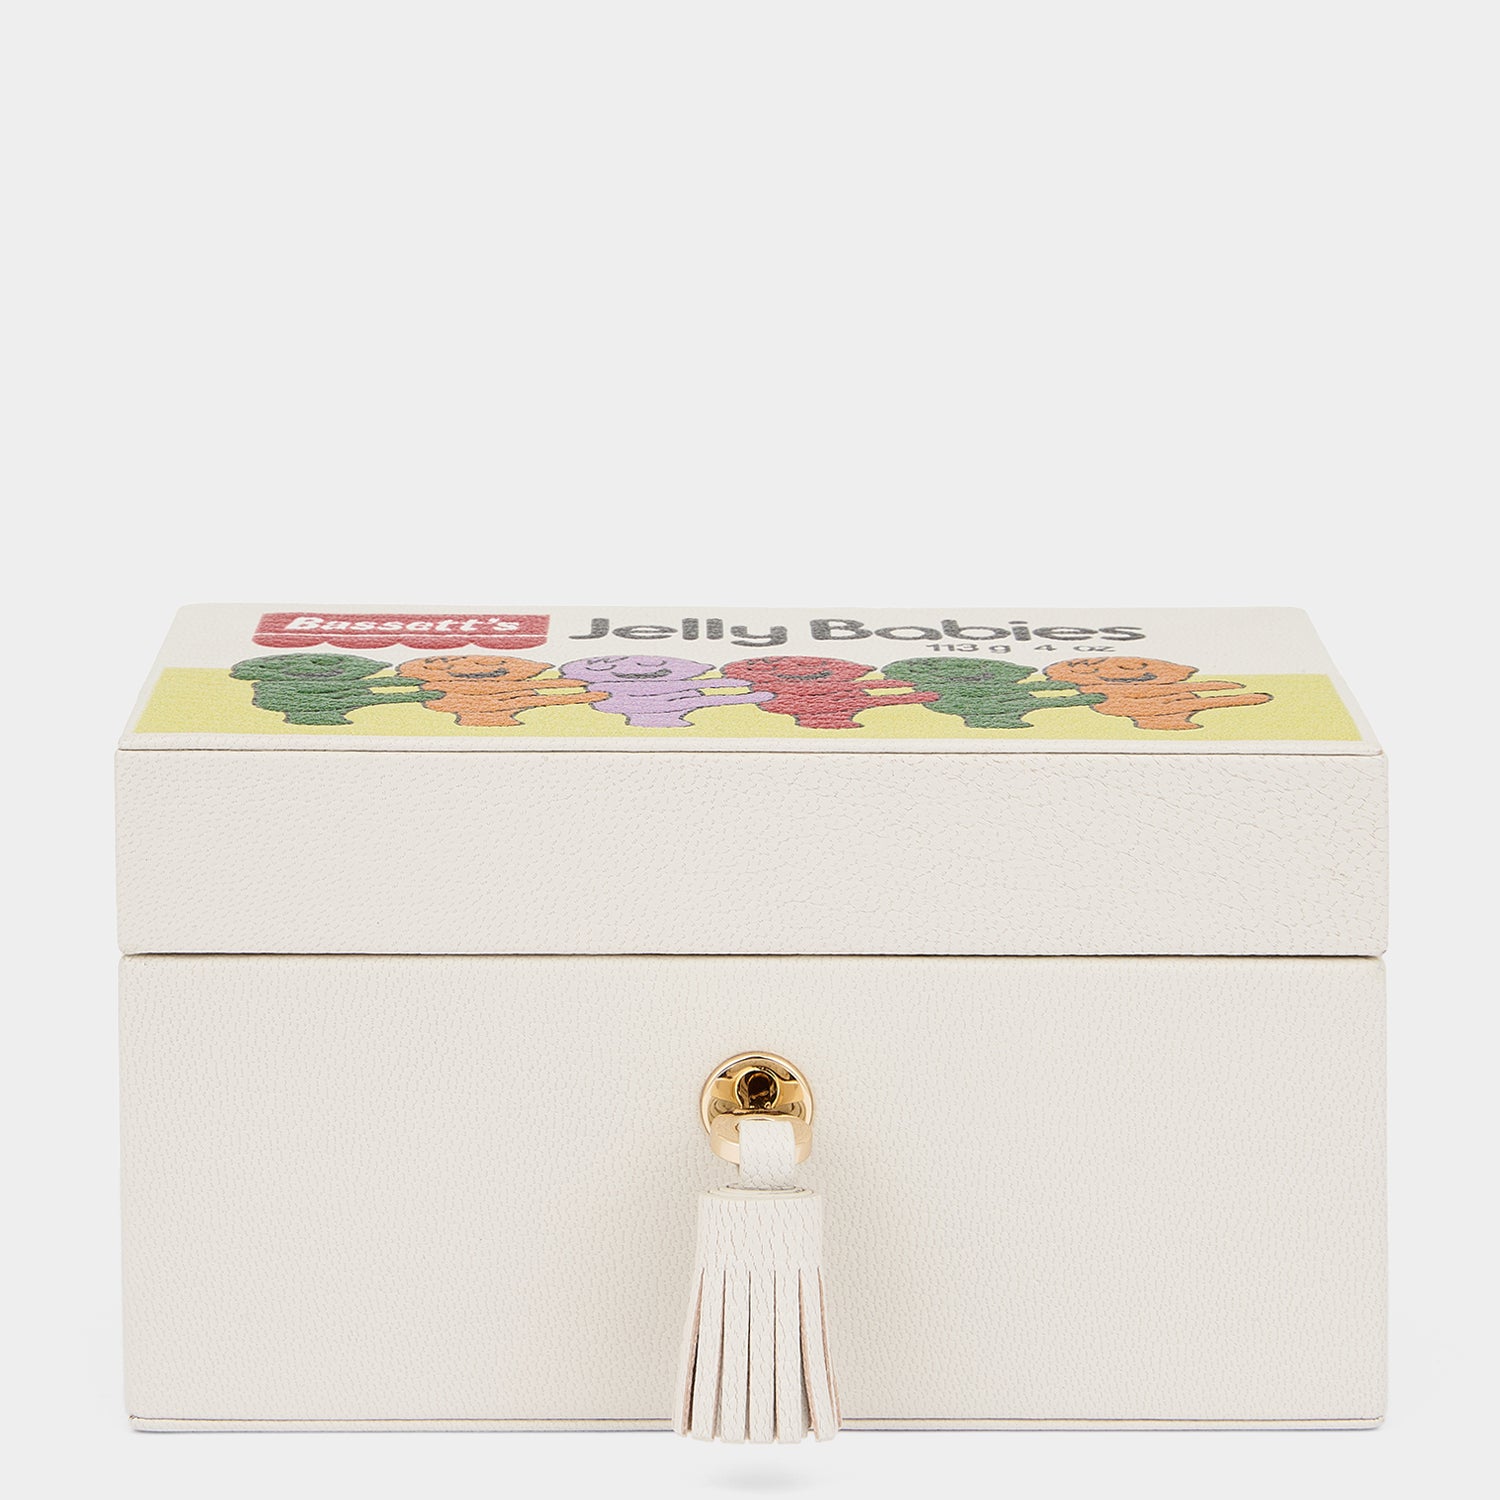 「Jelly Babies」 ボックス -

                  
                    Capra Leather in Chalk -
                  

                  Anya Hindmarch JP
